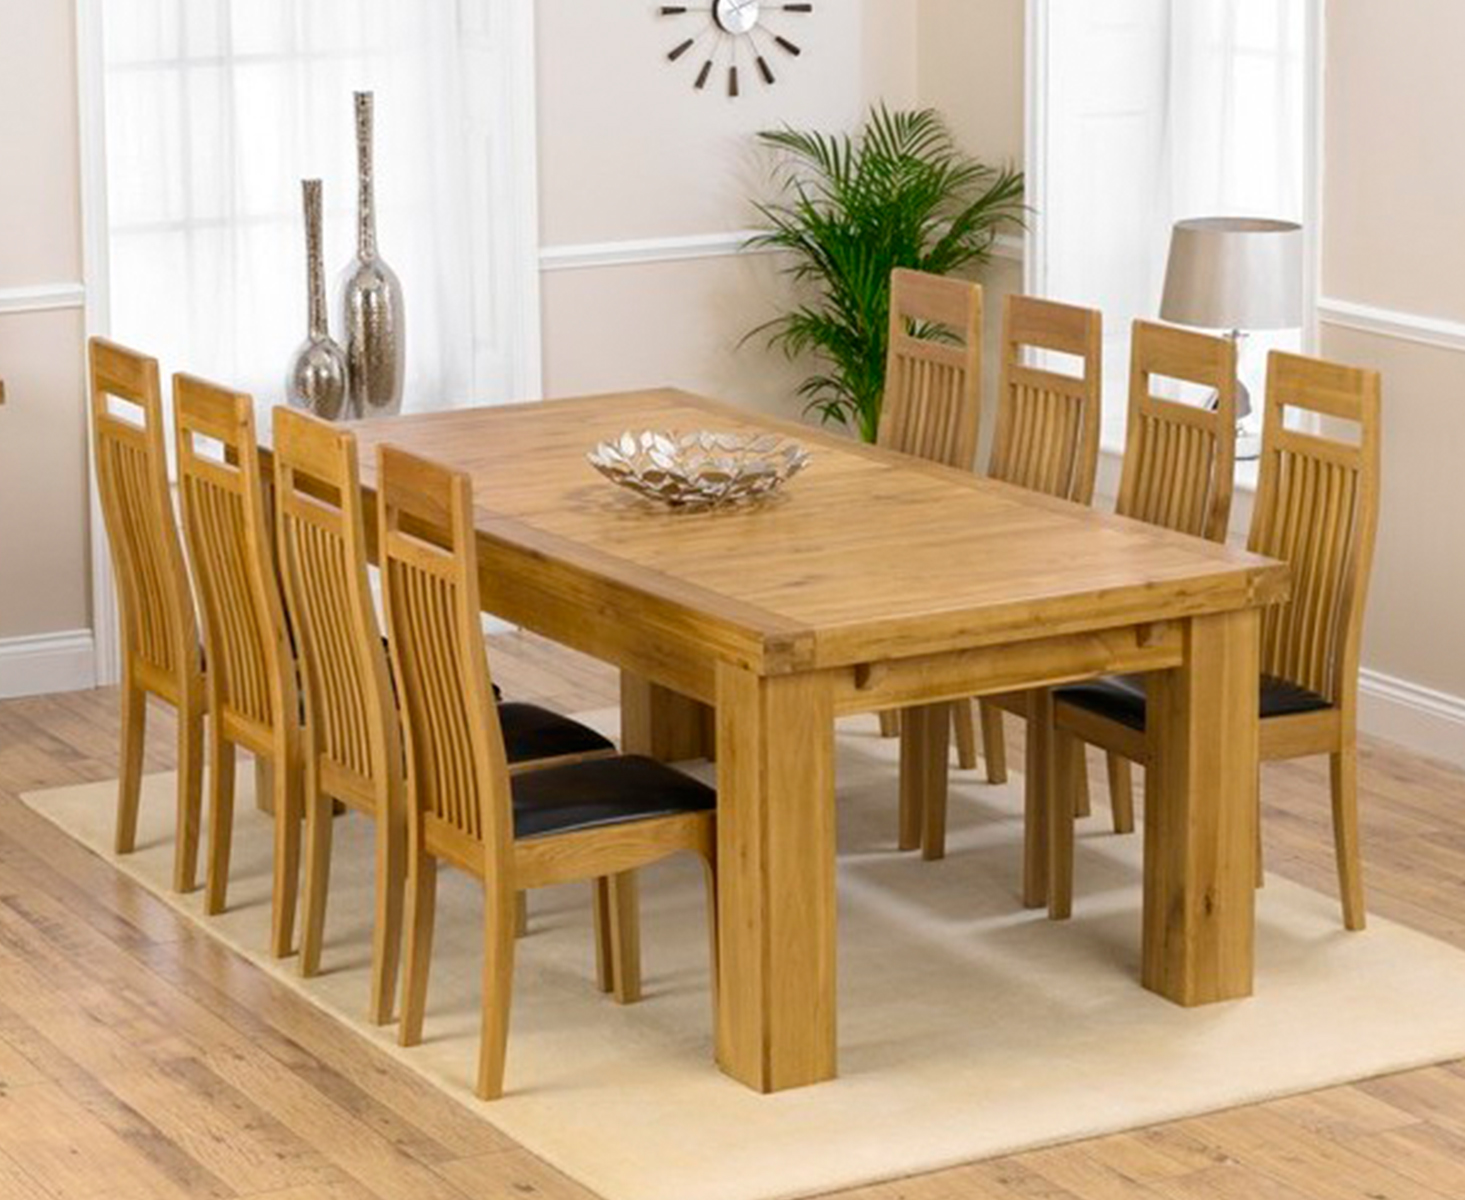 Loire 230cm Solid Oak Extending Dining Table With 6 Black Monaco Chairs